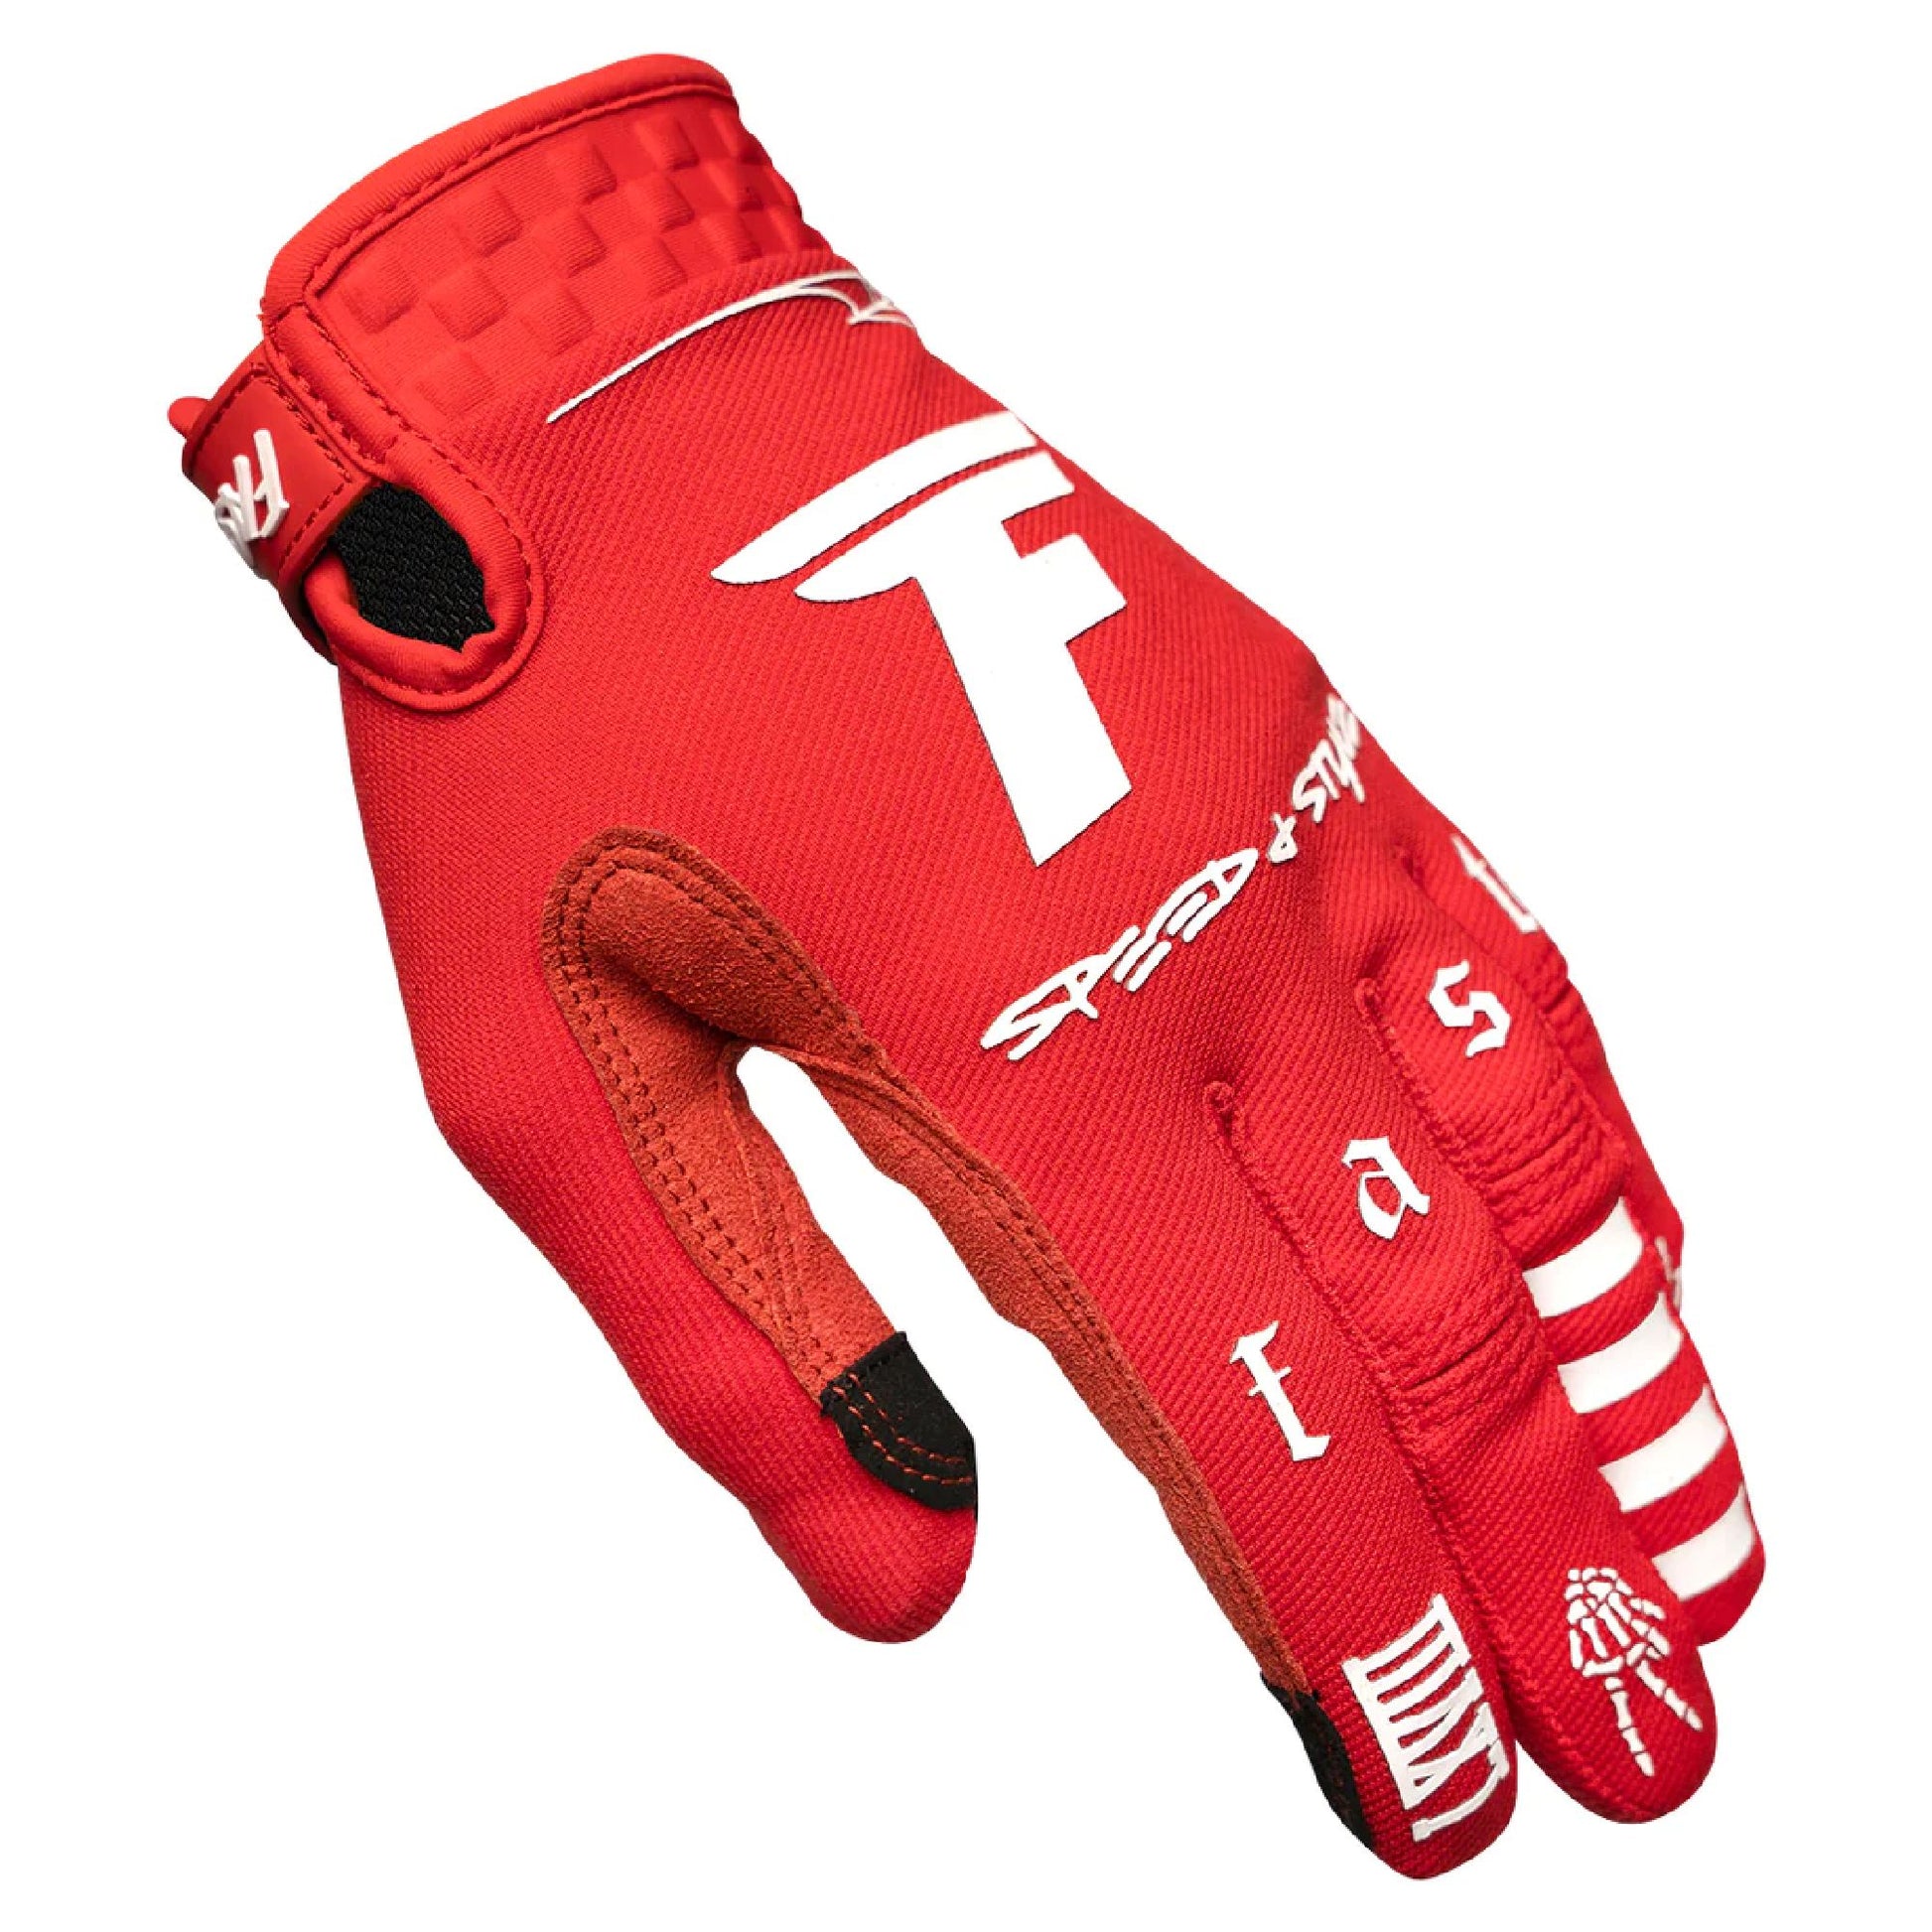 Fasthouse Burn Free Speed Style Glove Red Bike Gloves